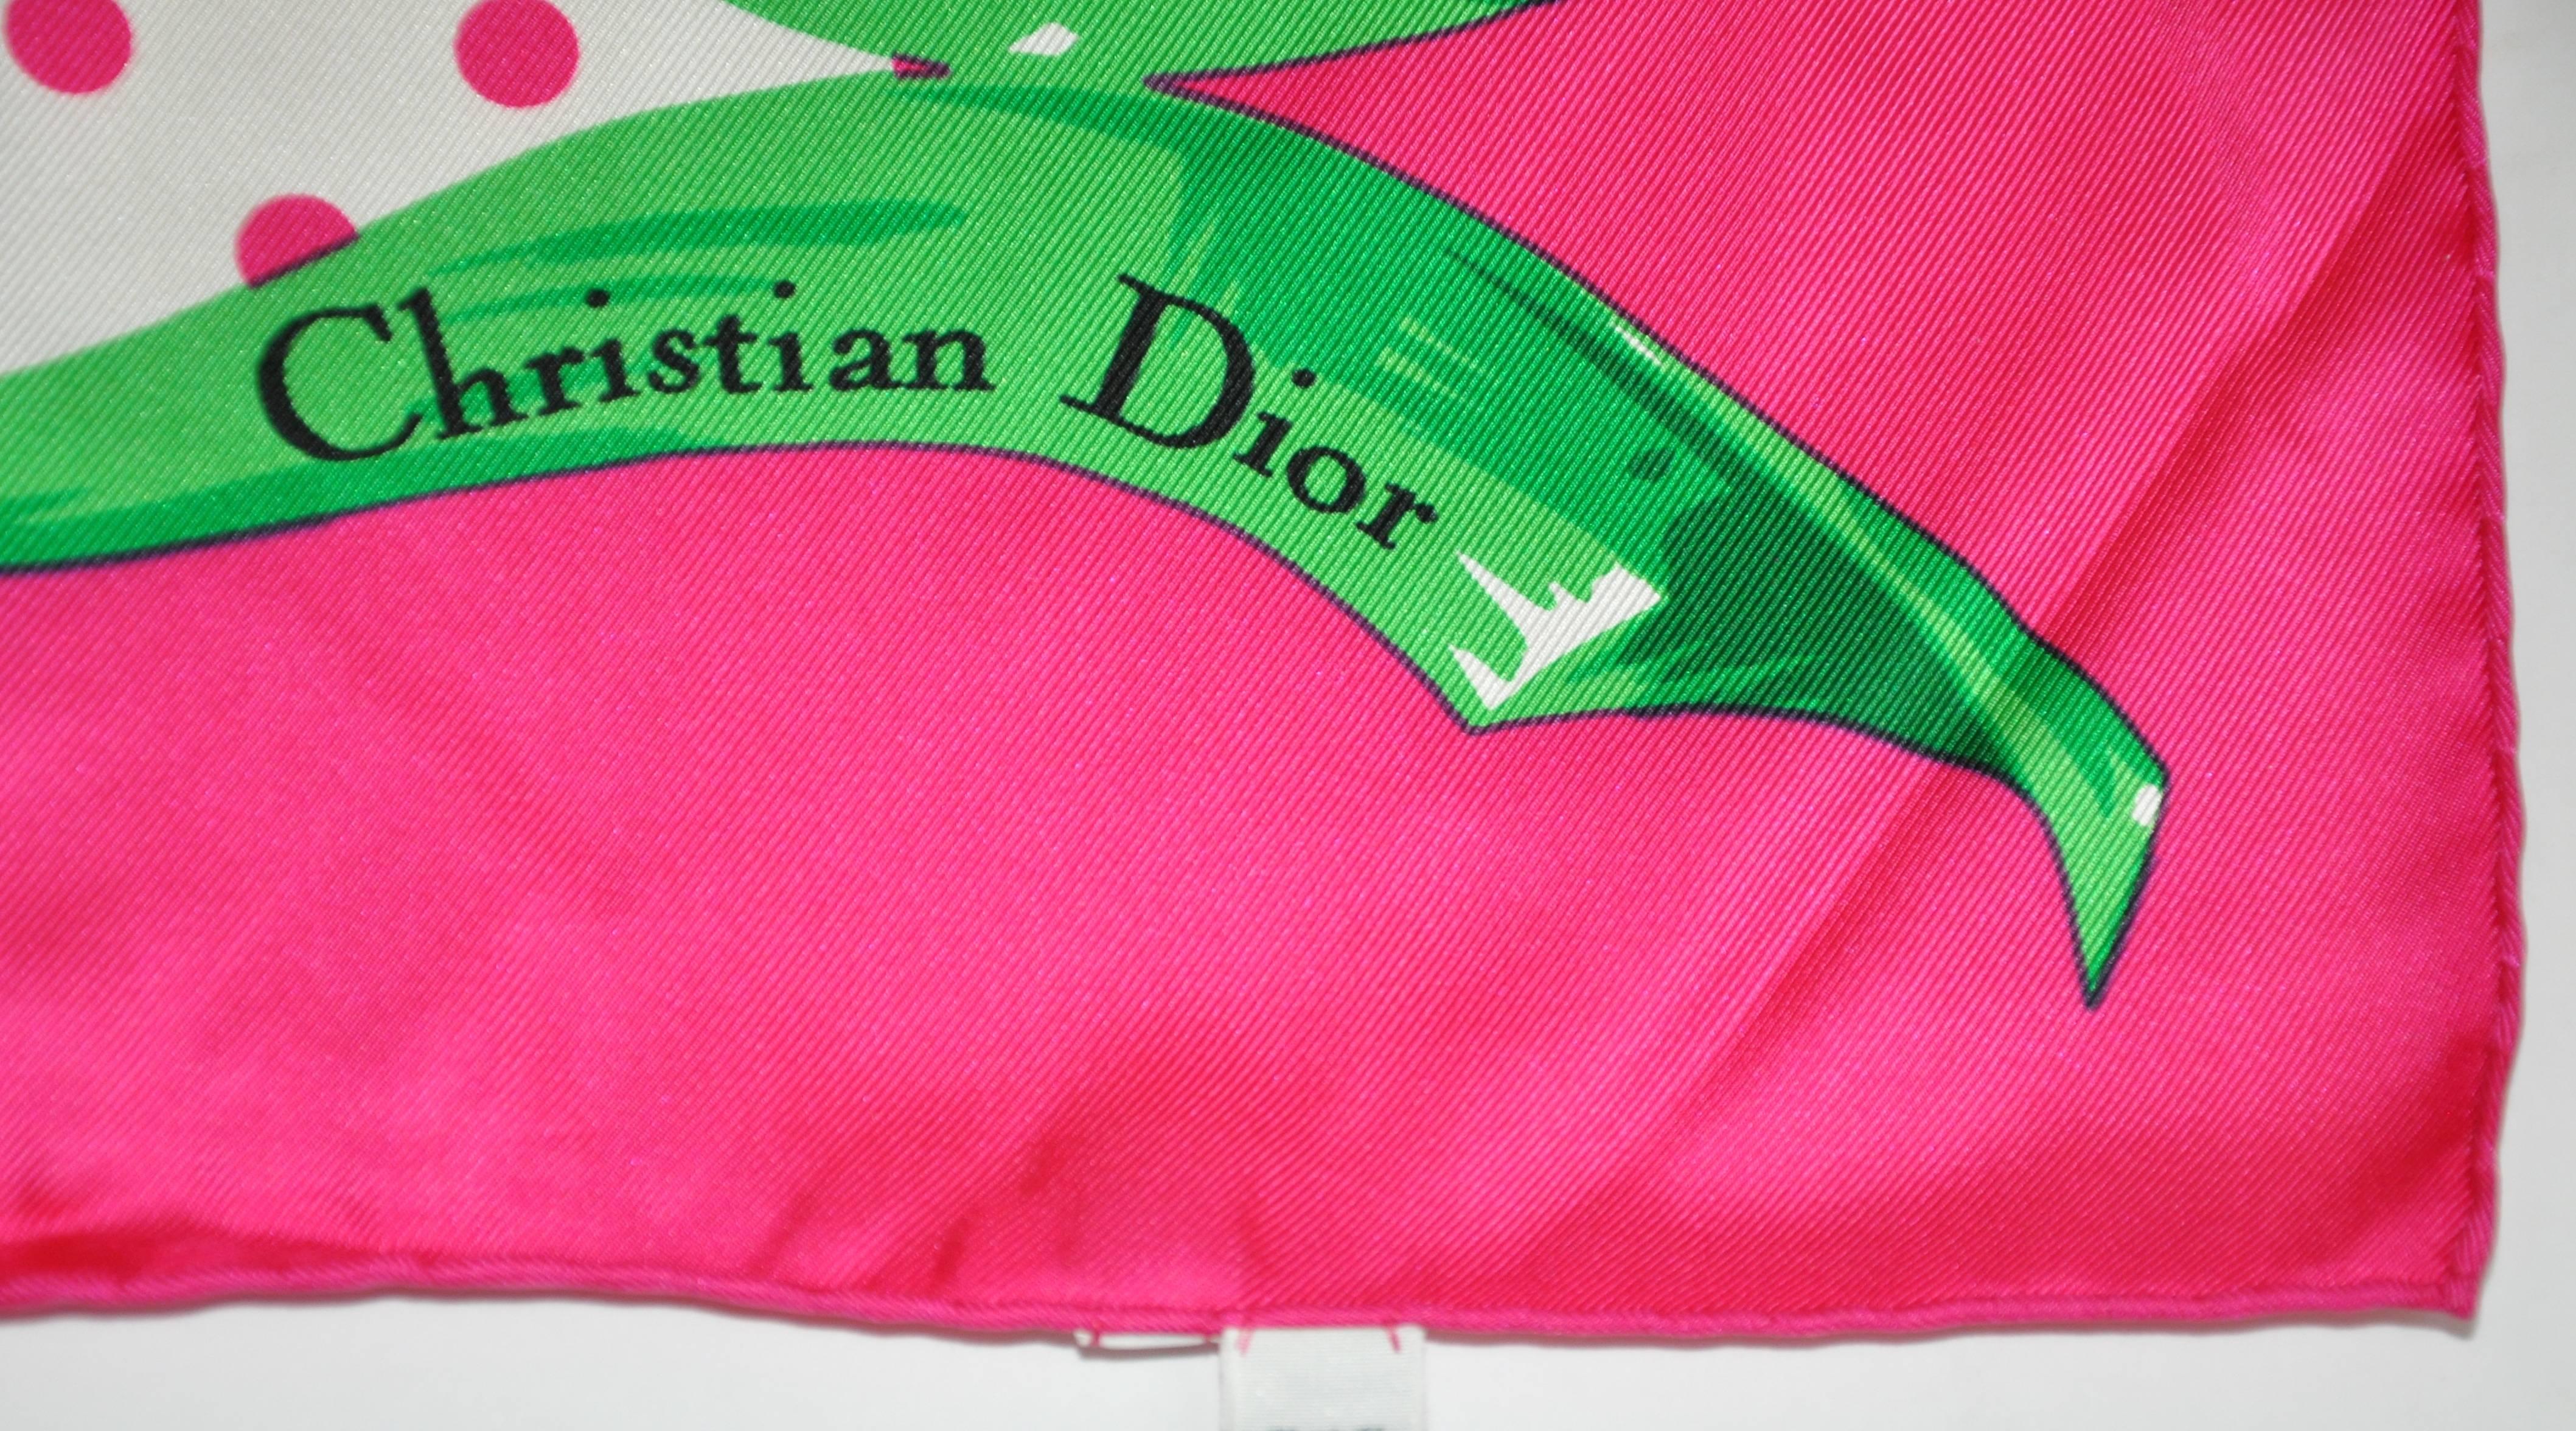        Christian Dior's wonderfully bold & bright with multi-colors of creams, fuchsia, greens and black 